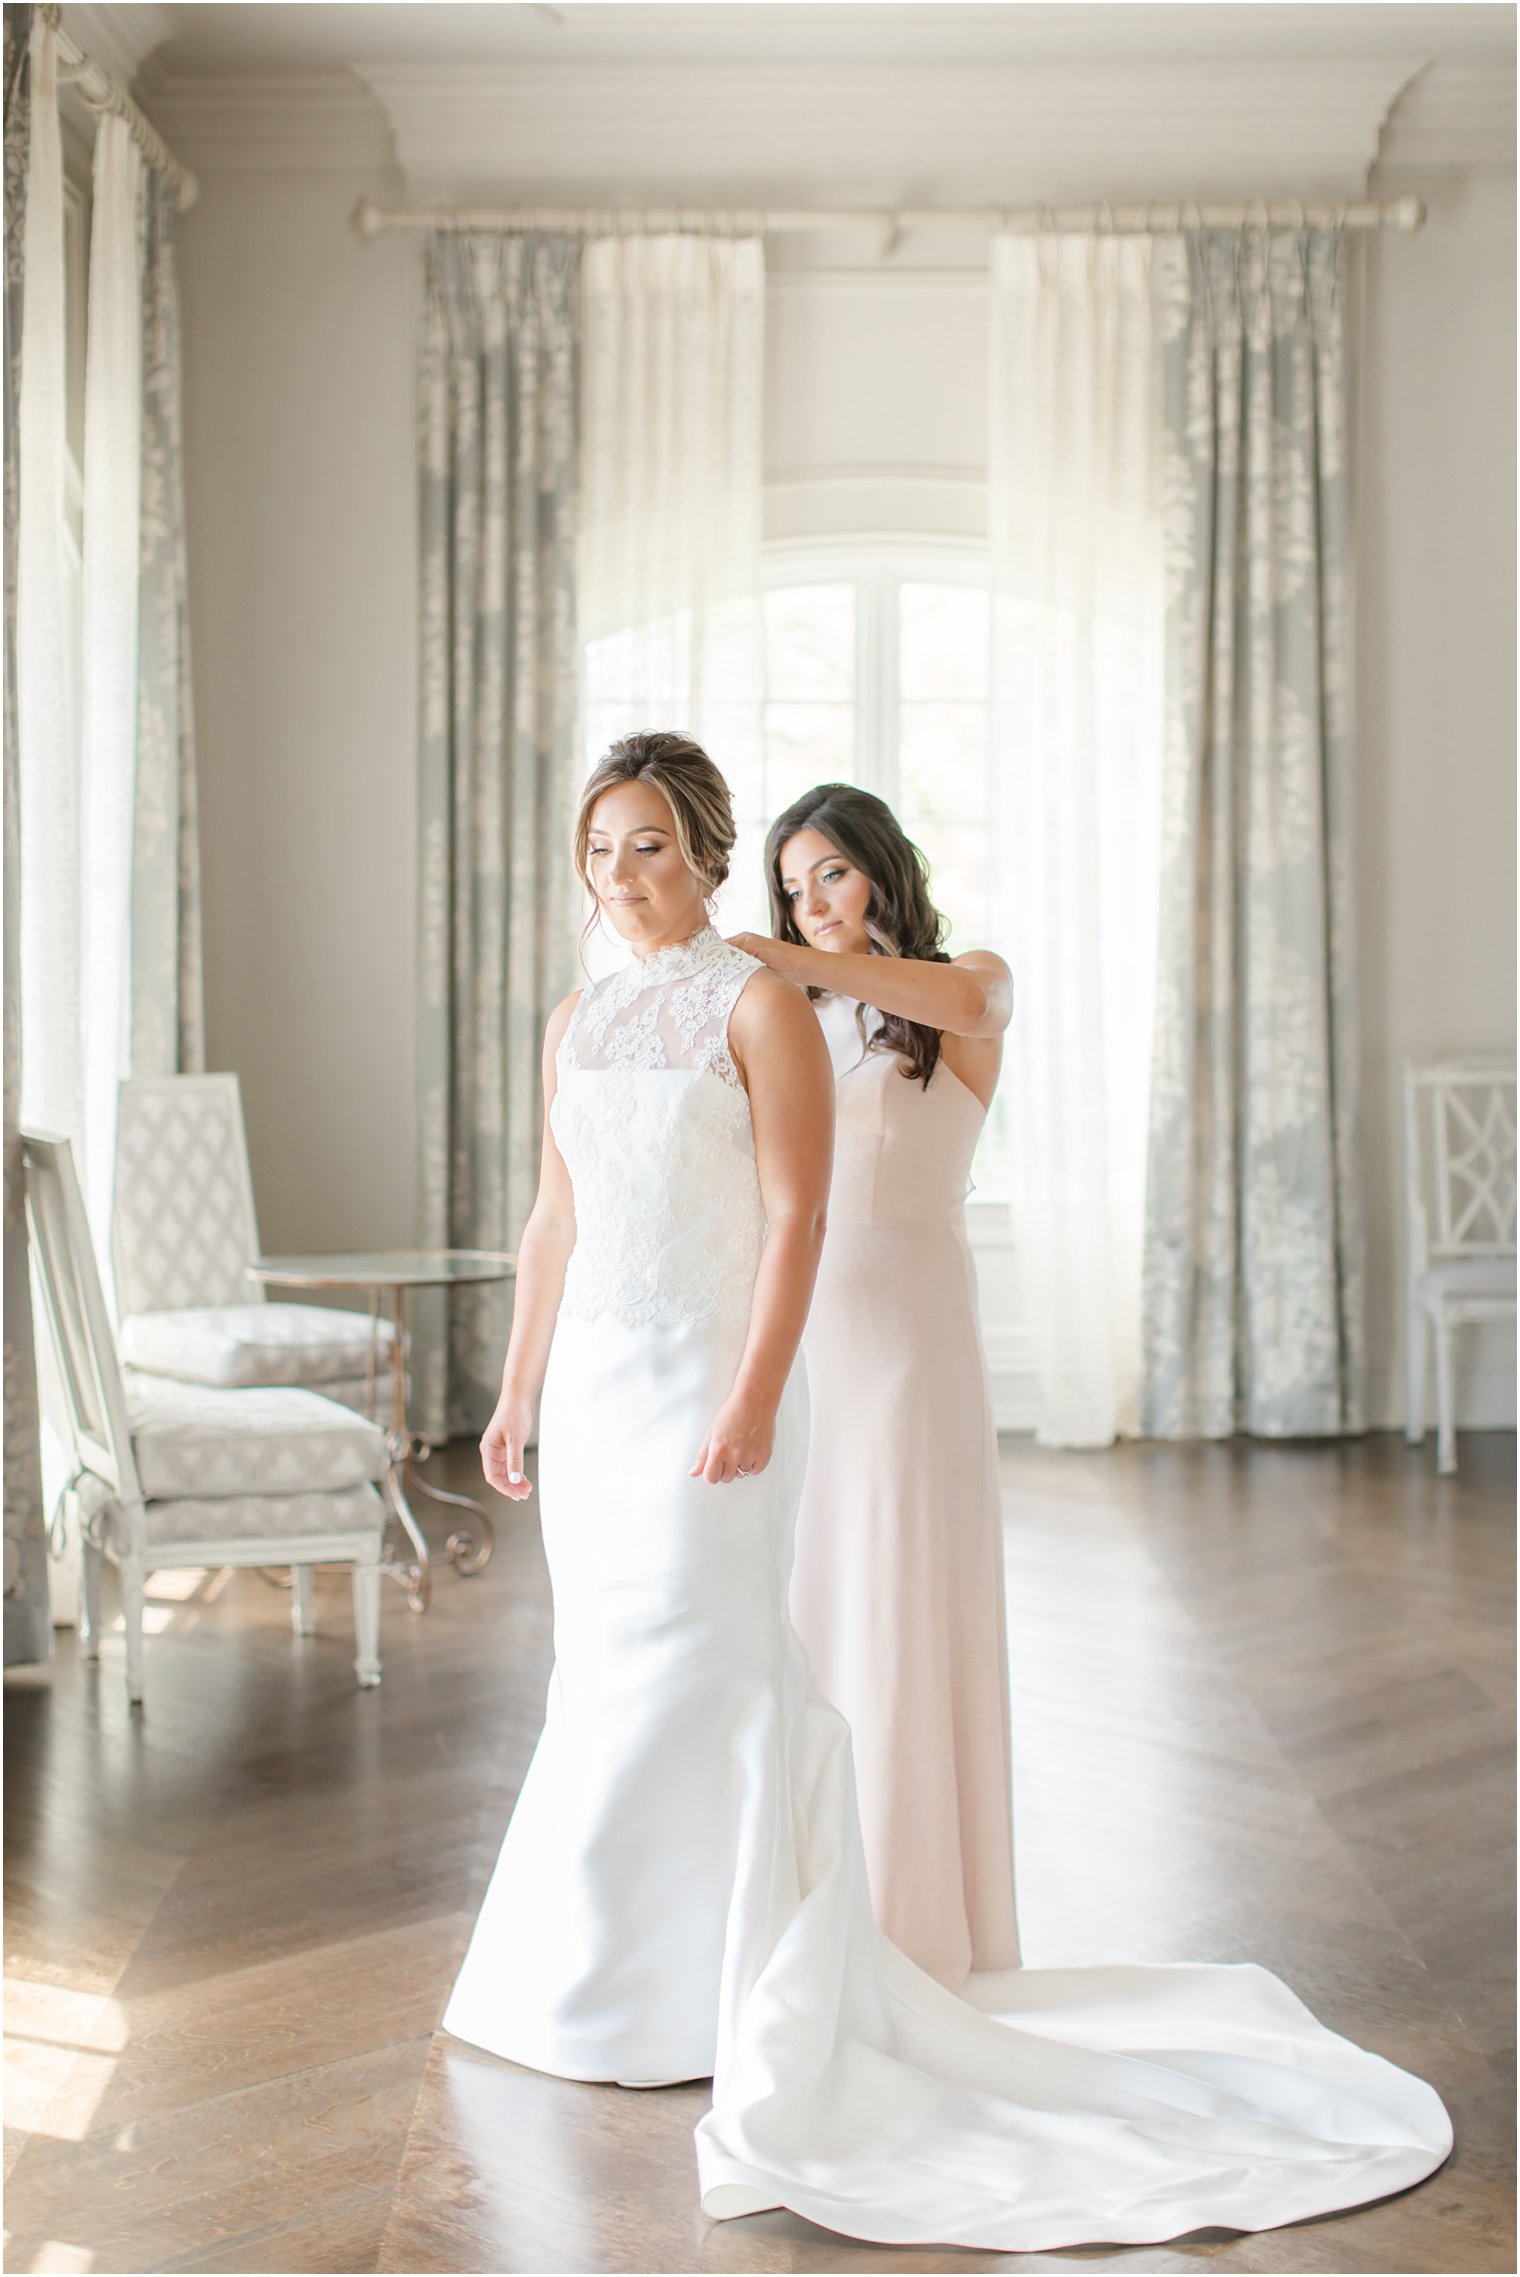 Maid of honor helping bride get dressed on wedding day at Park Chateau Estate and Gardens